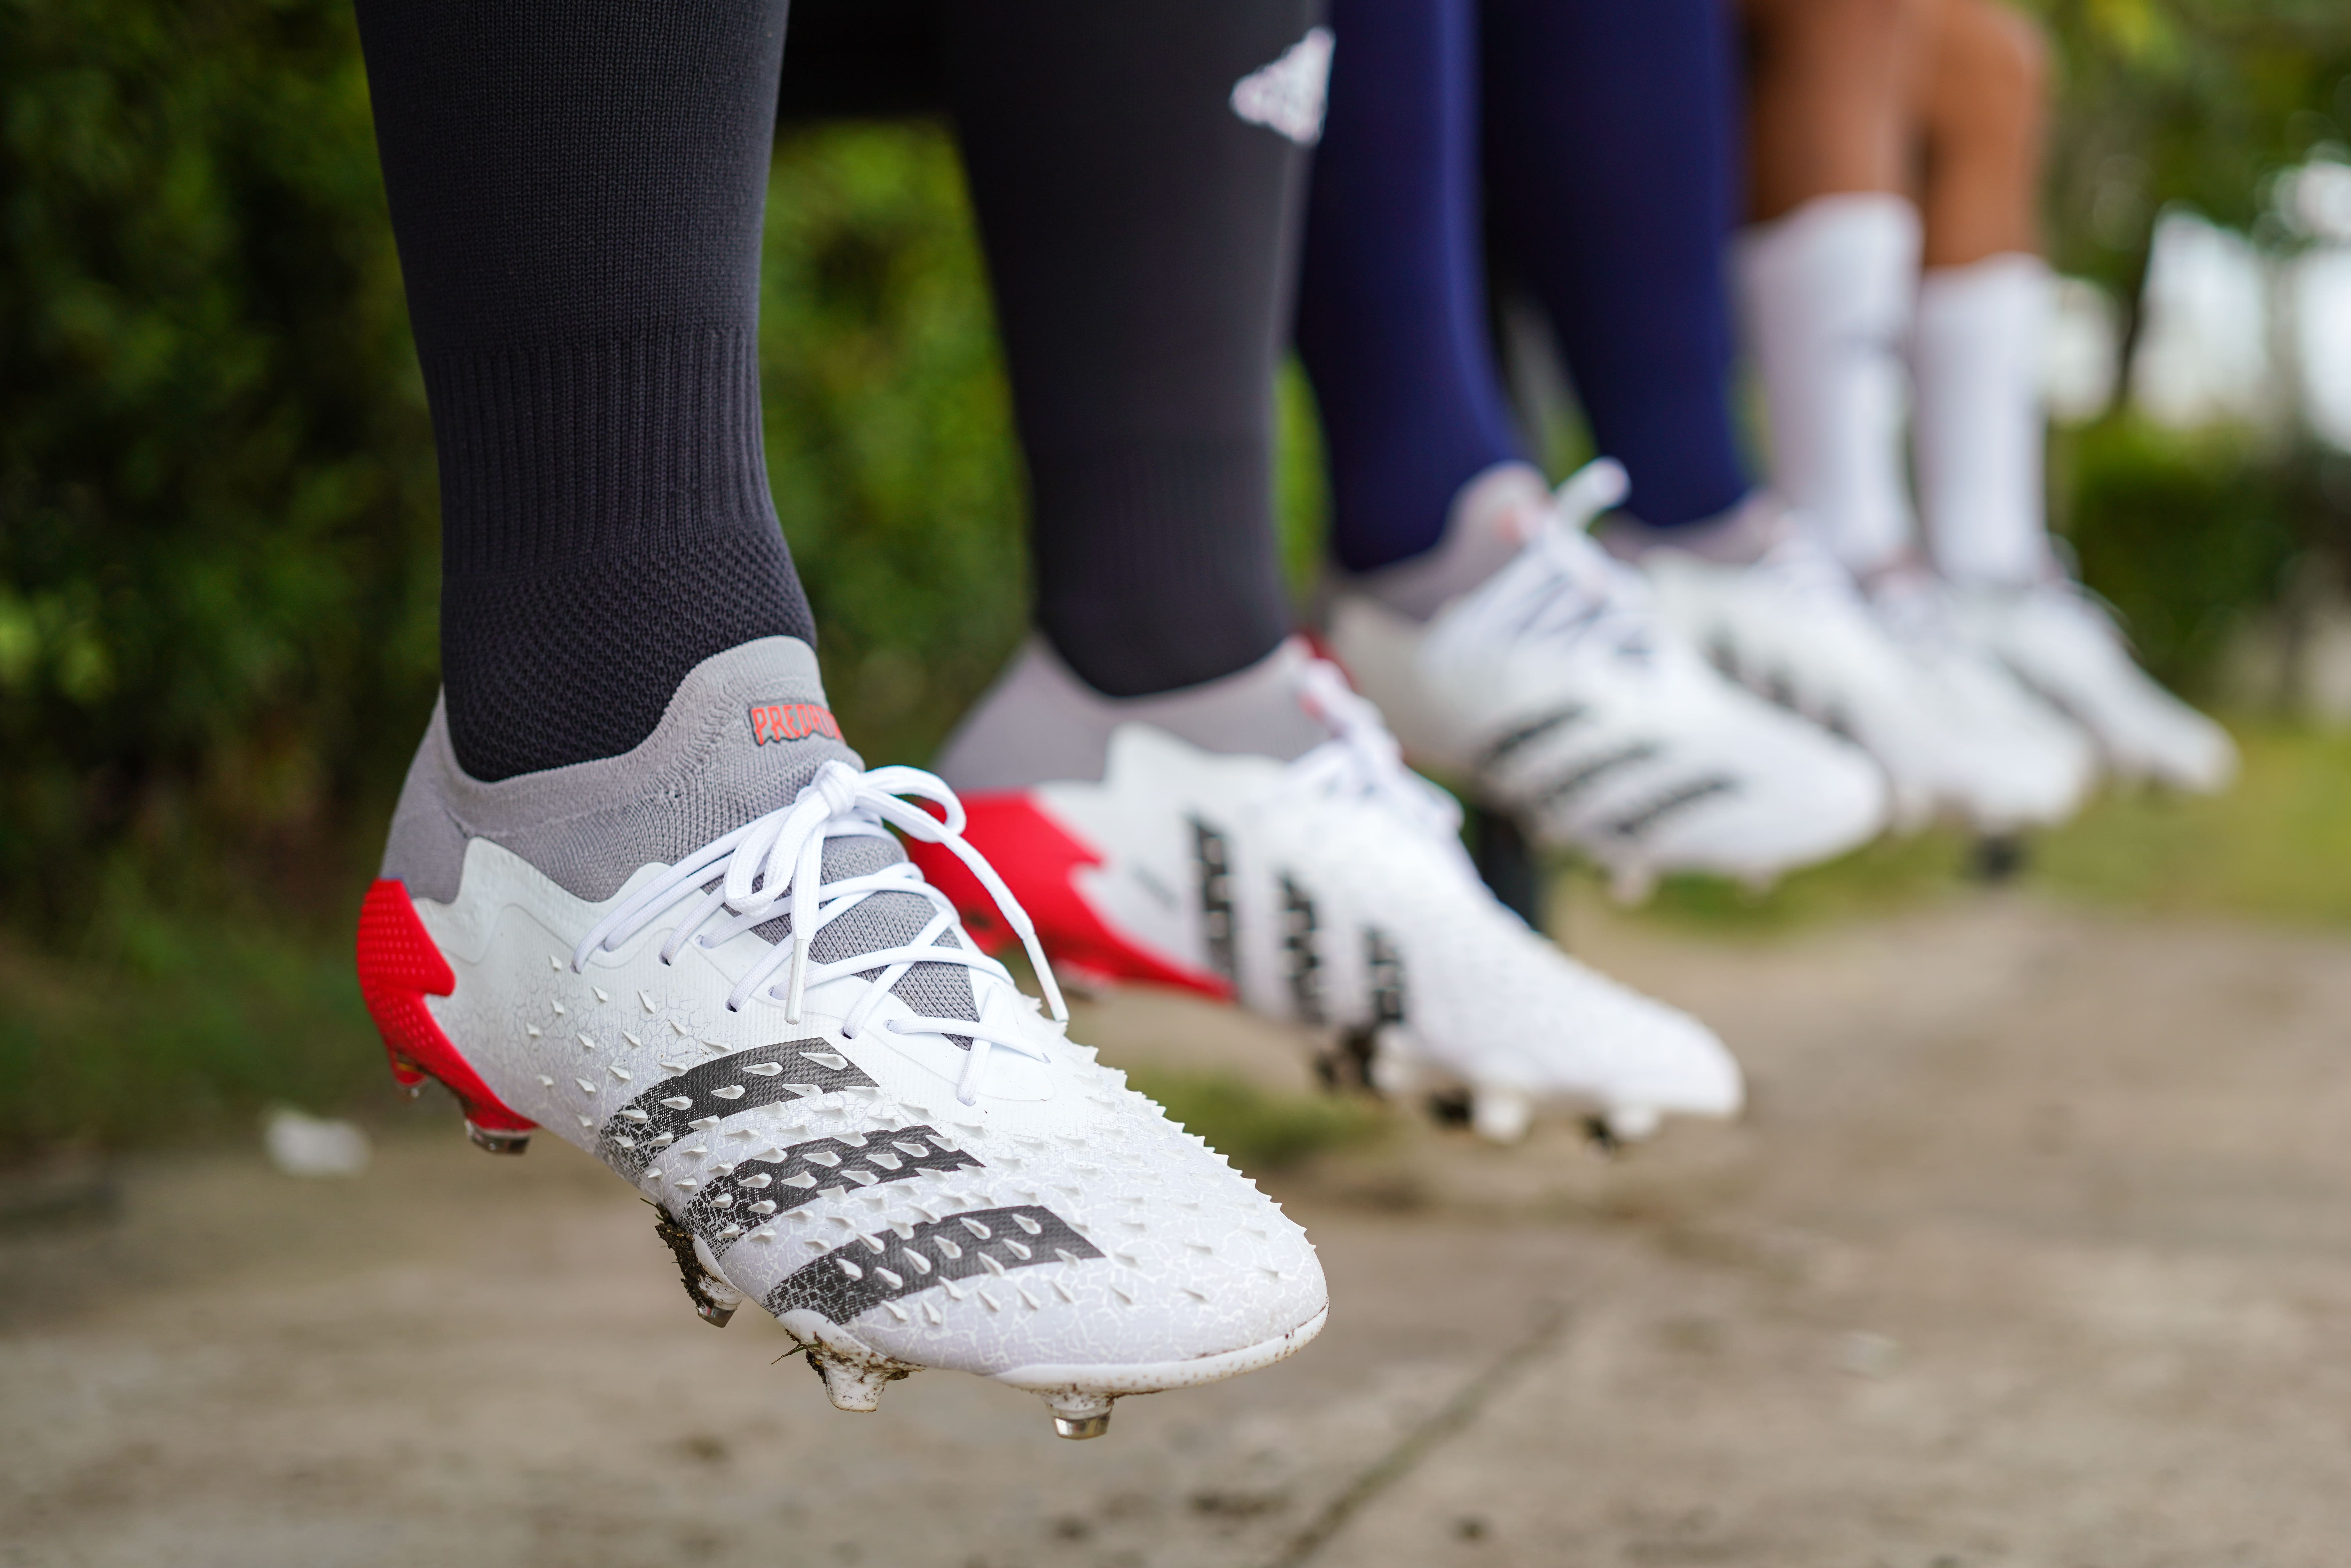 Are Puma Soccer Cleats Good for Wide Feet: Fit Guide